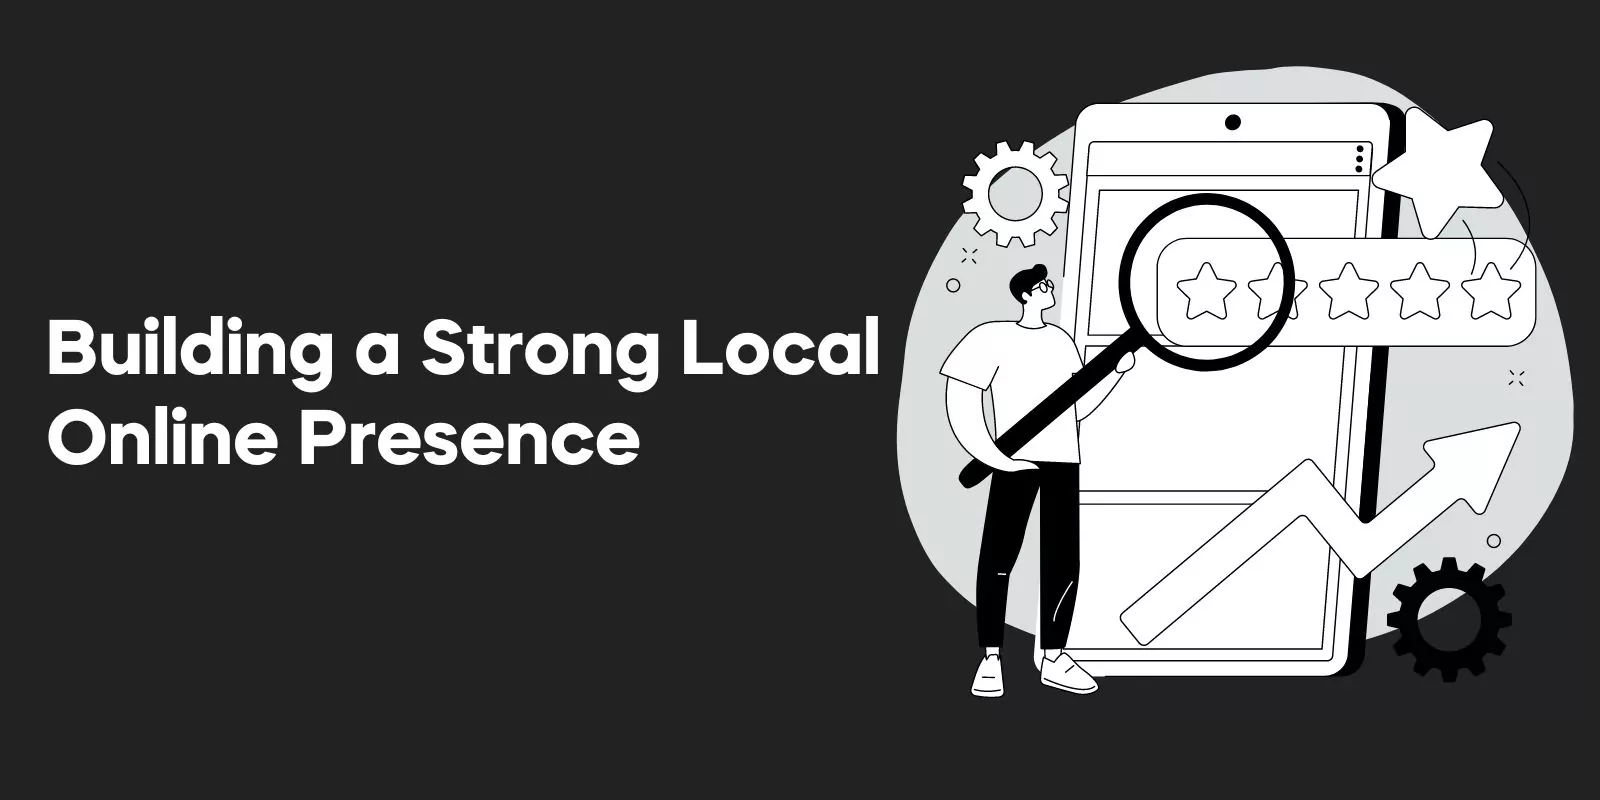 Building a Strong Local Online Presence